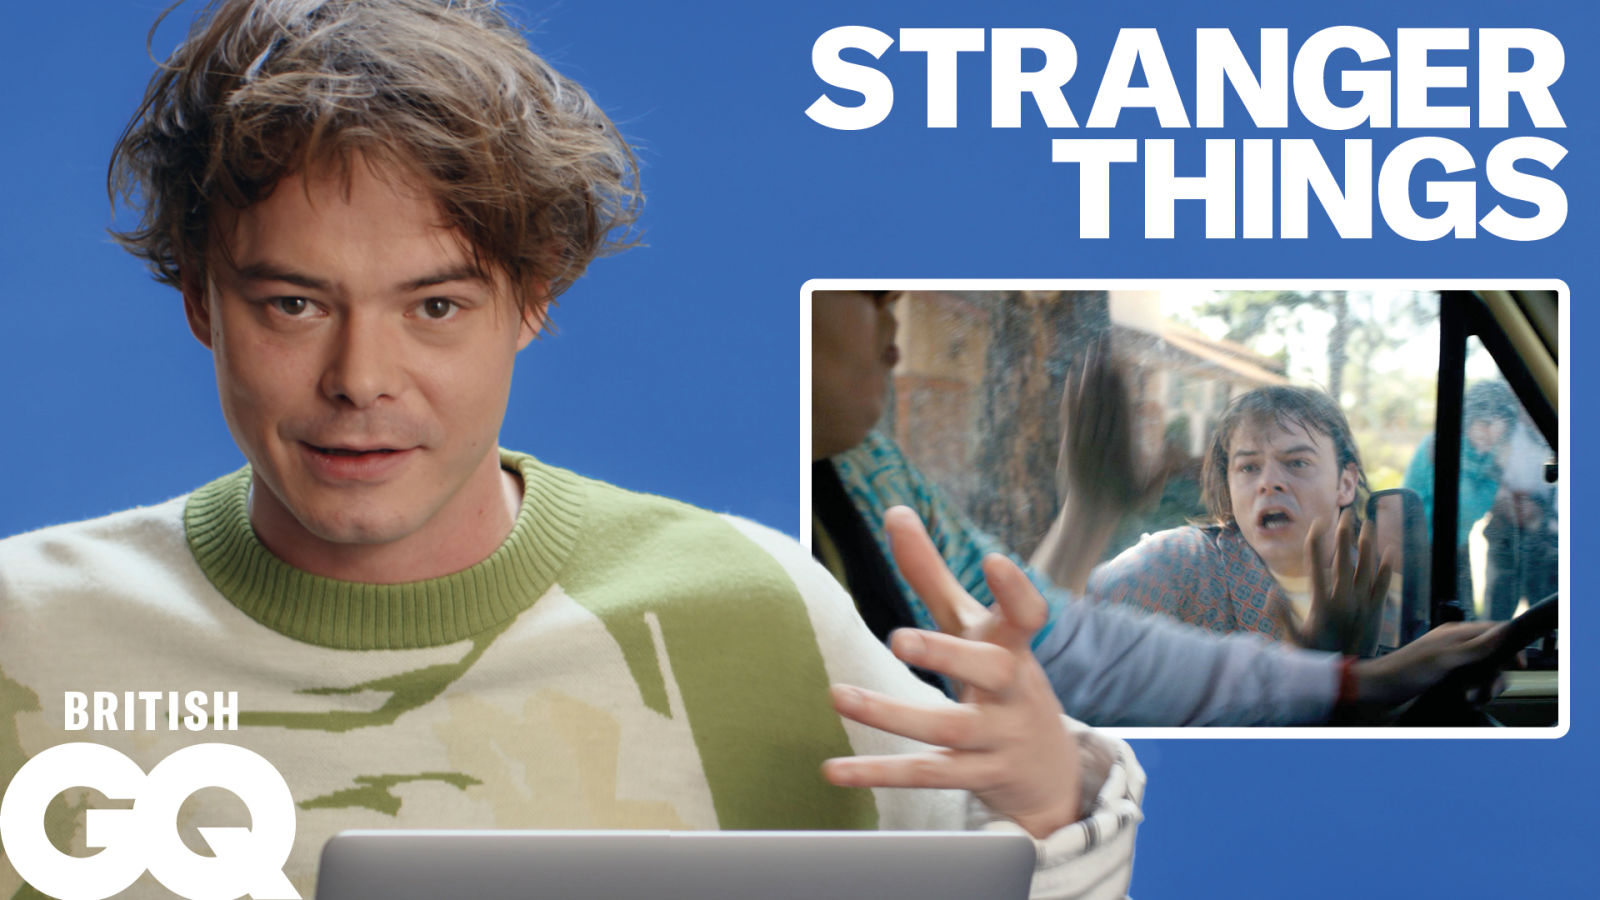 Charlie Heaton reacts to Stranger Things season 4: "It just adds to the chaos of it all"